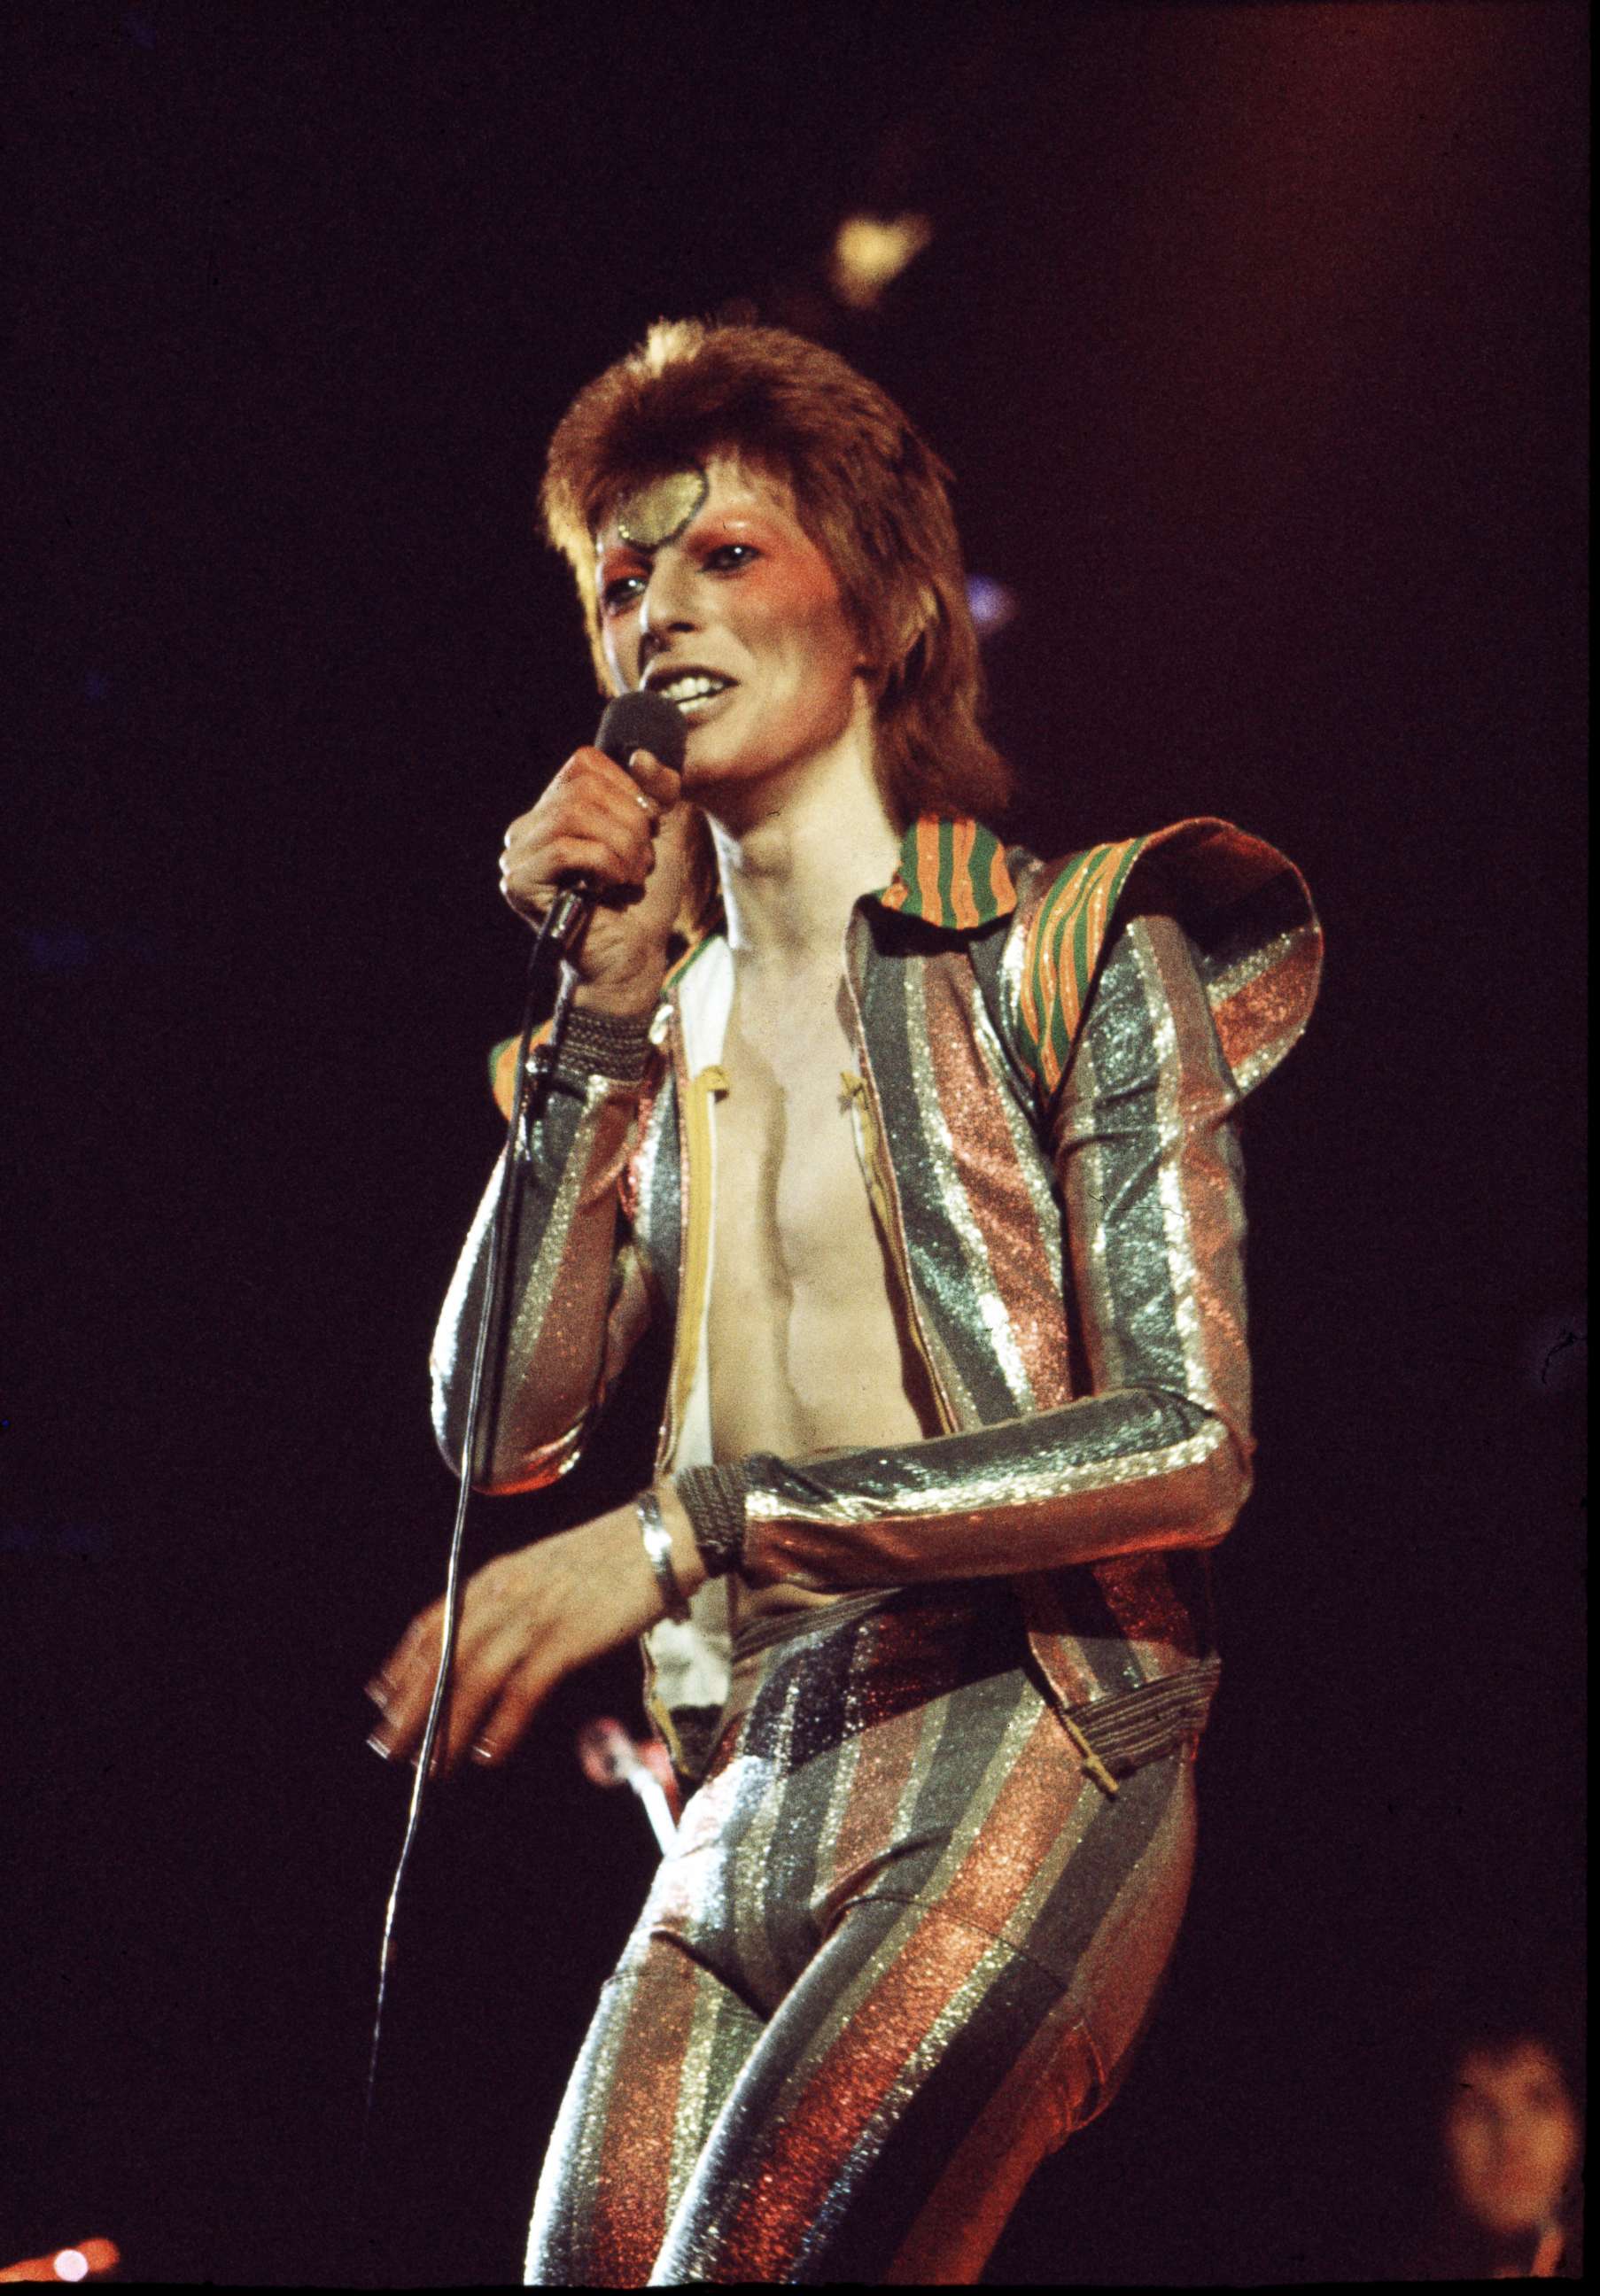 PHOTO: David Bowie performs on stage on his Ziggy Stardust character during the "Aladdin Sane" tour in London, 1973.